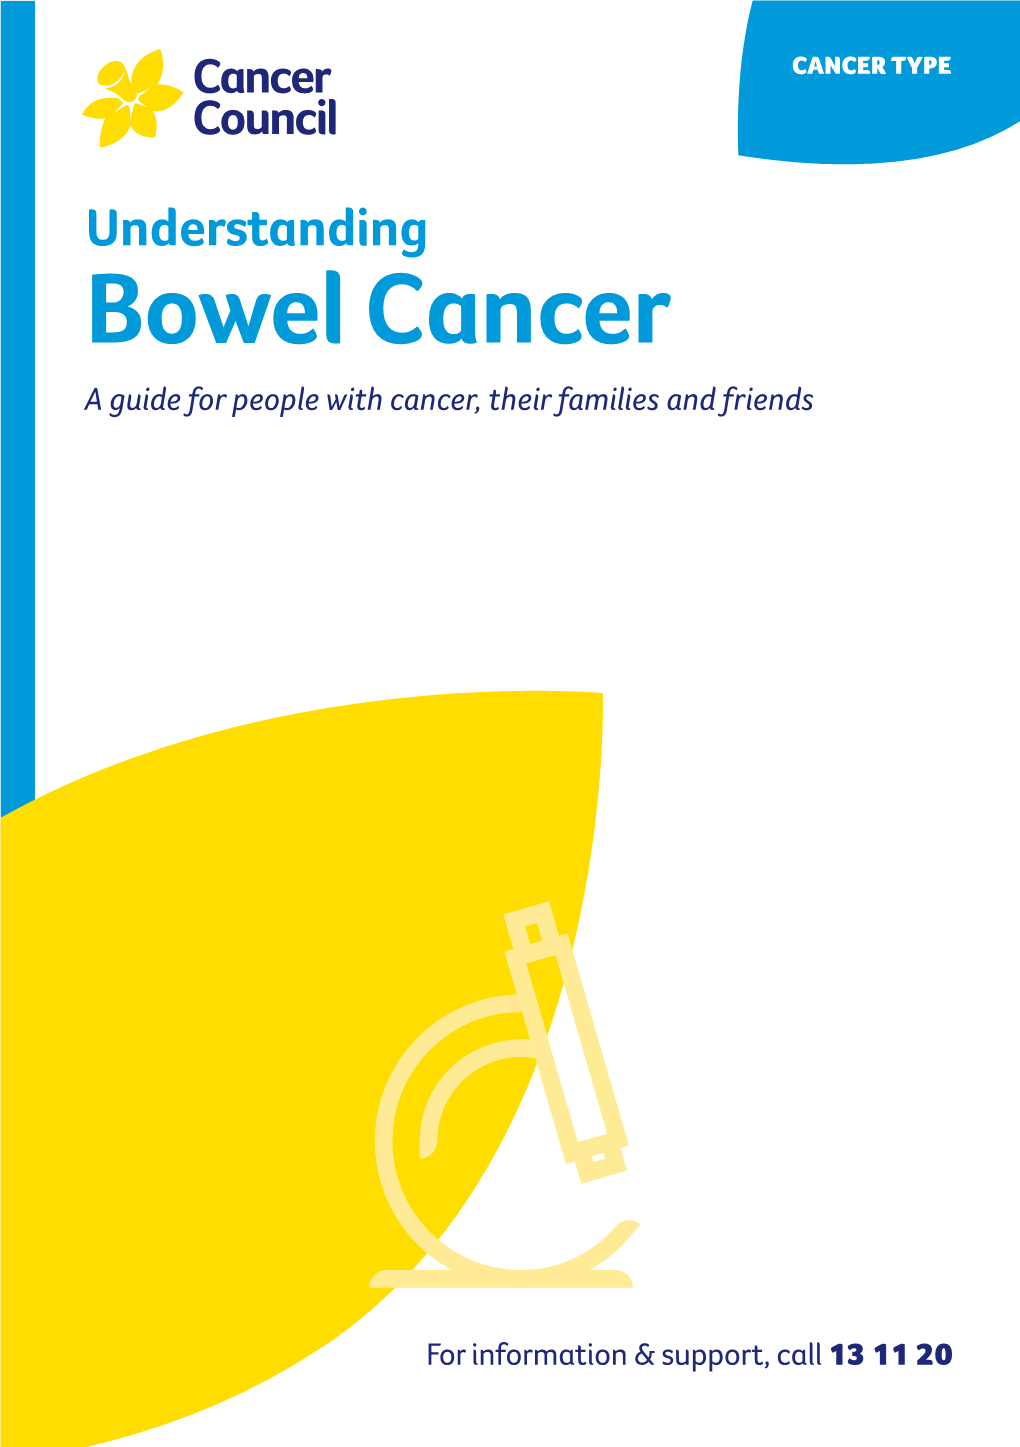 UNDERSTANDING BOWEL CANCER JAN 2021 CAN702 Understanding Bowel Cancer a Guide for People with Cancer, Their Families and Friends